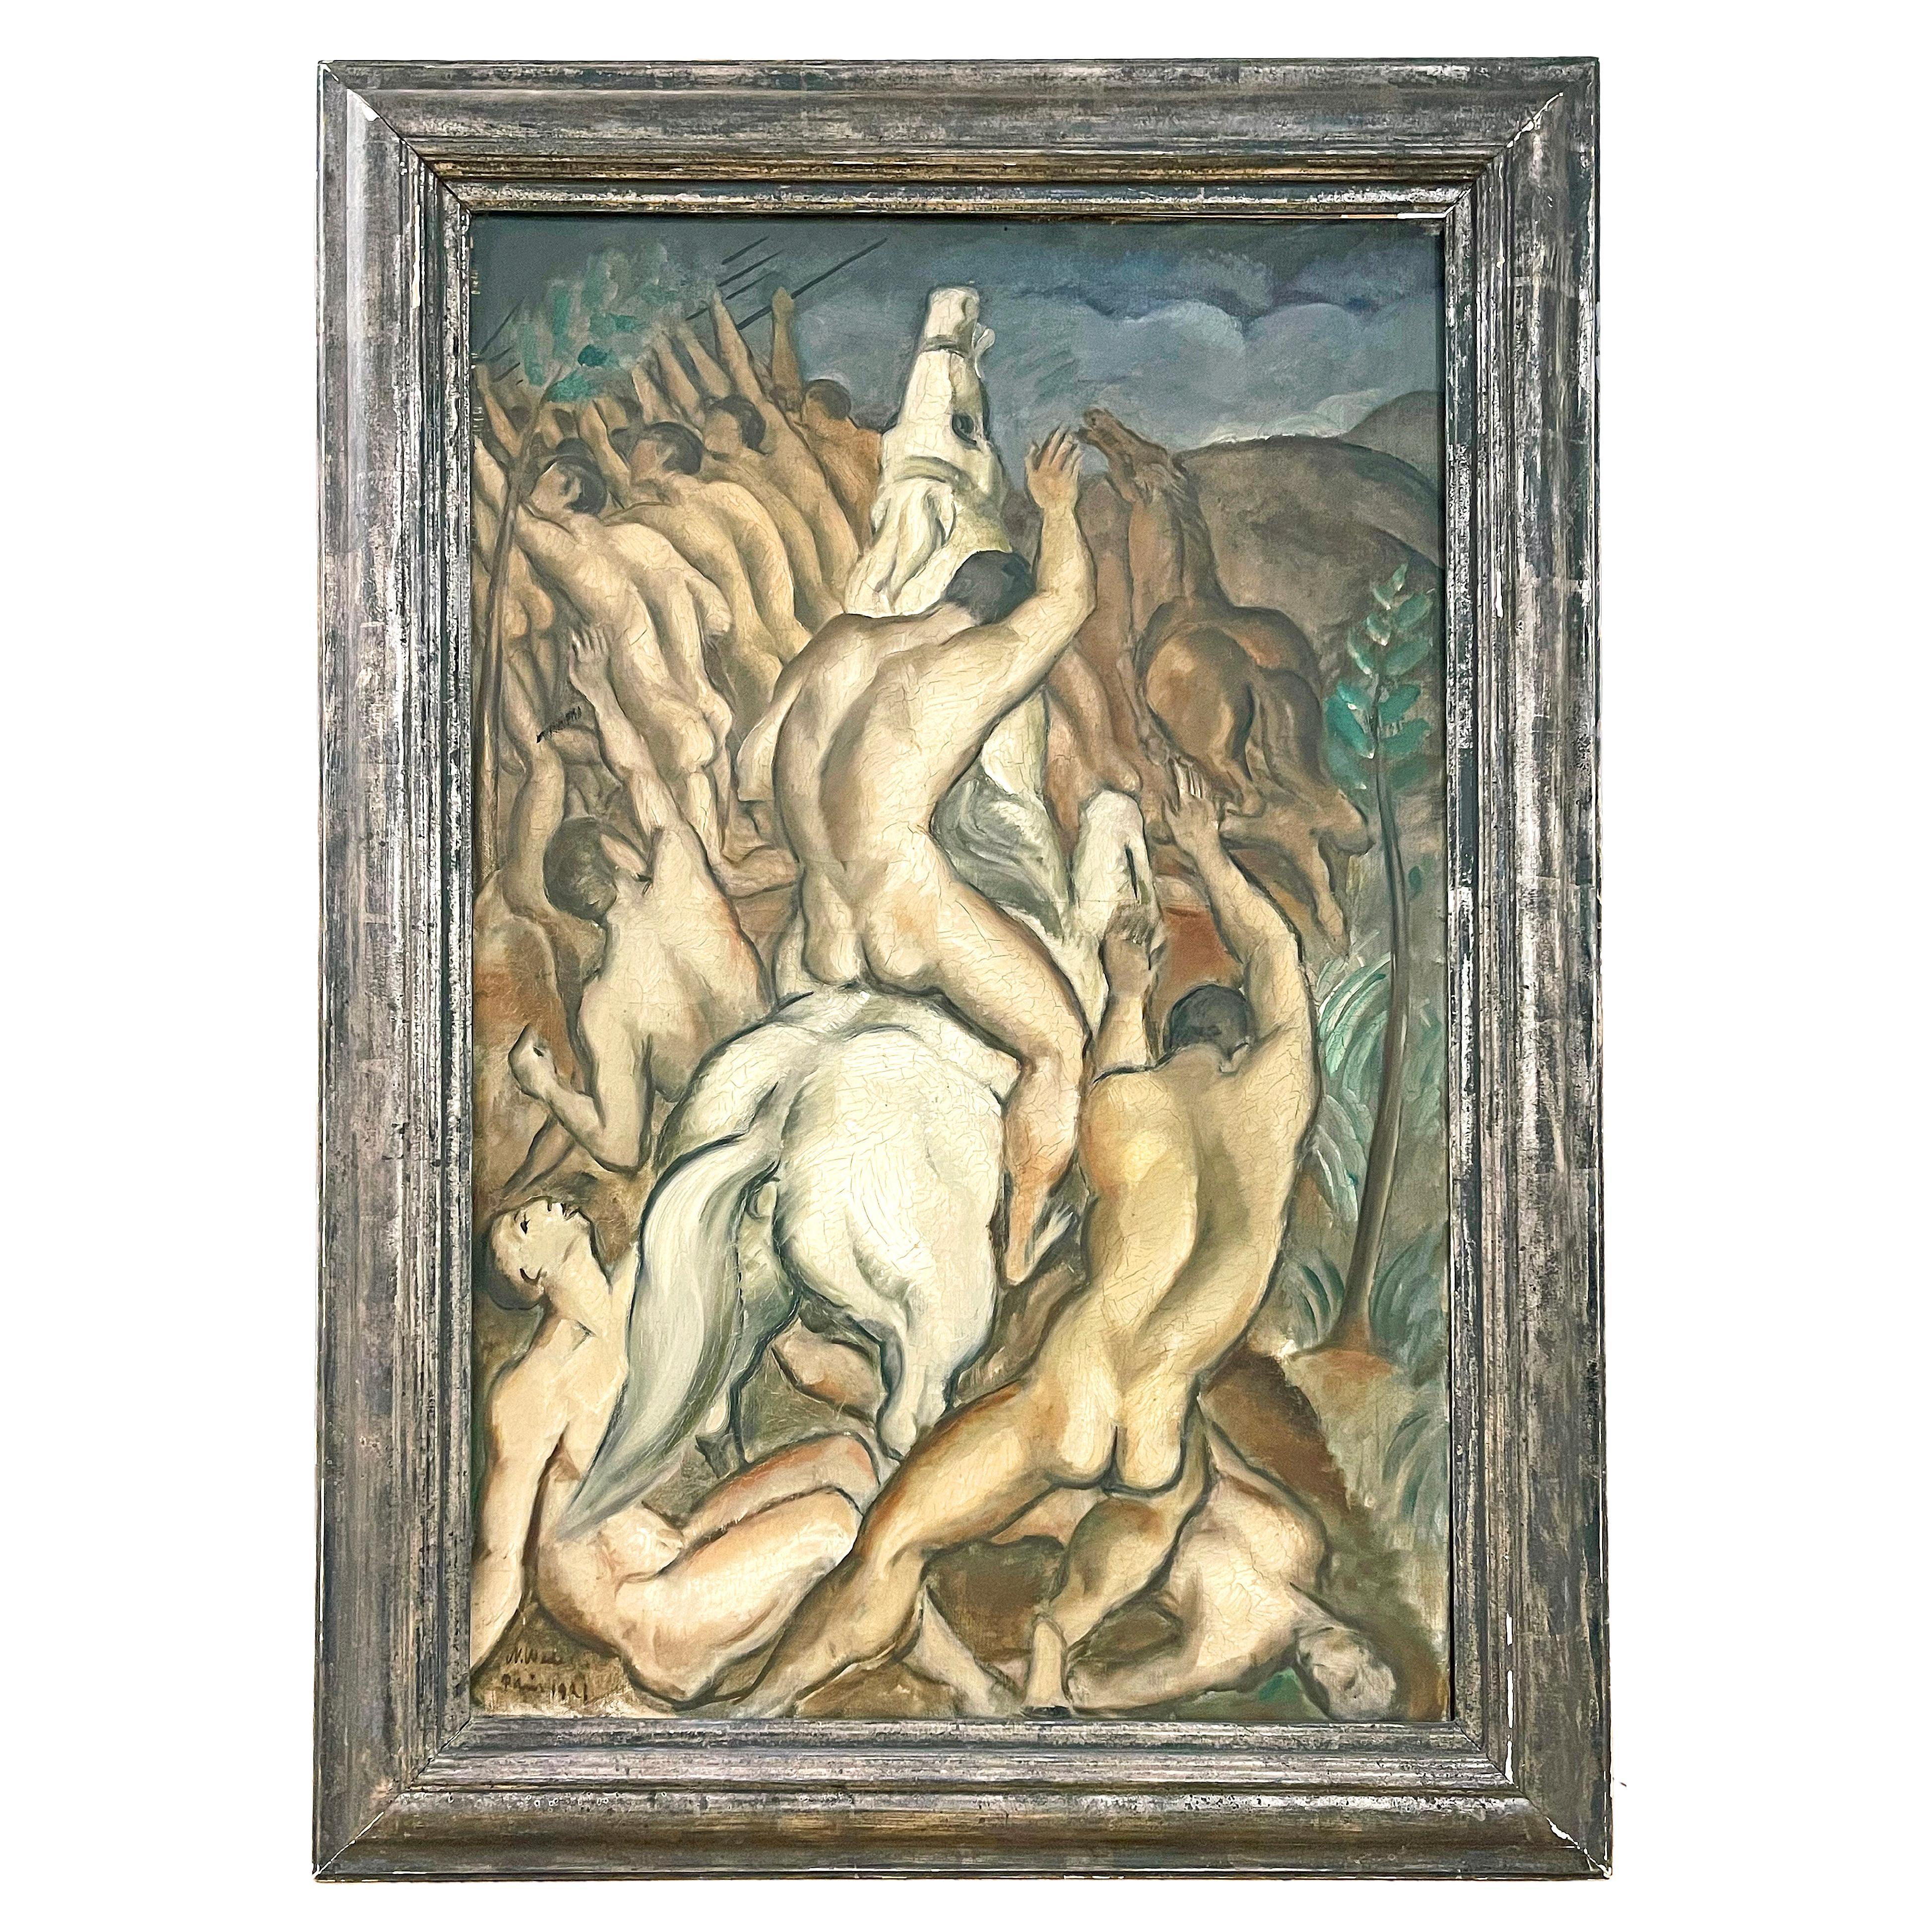 "Battle of the Nudes, " Large Art Deco Painting by Wedel, Elton John Collection